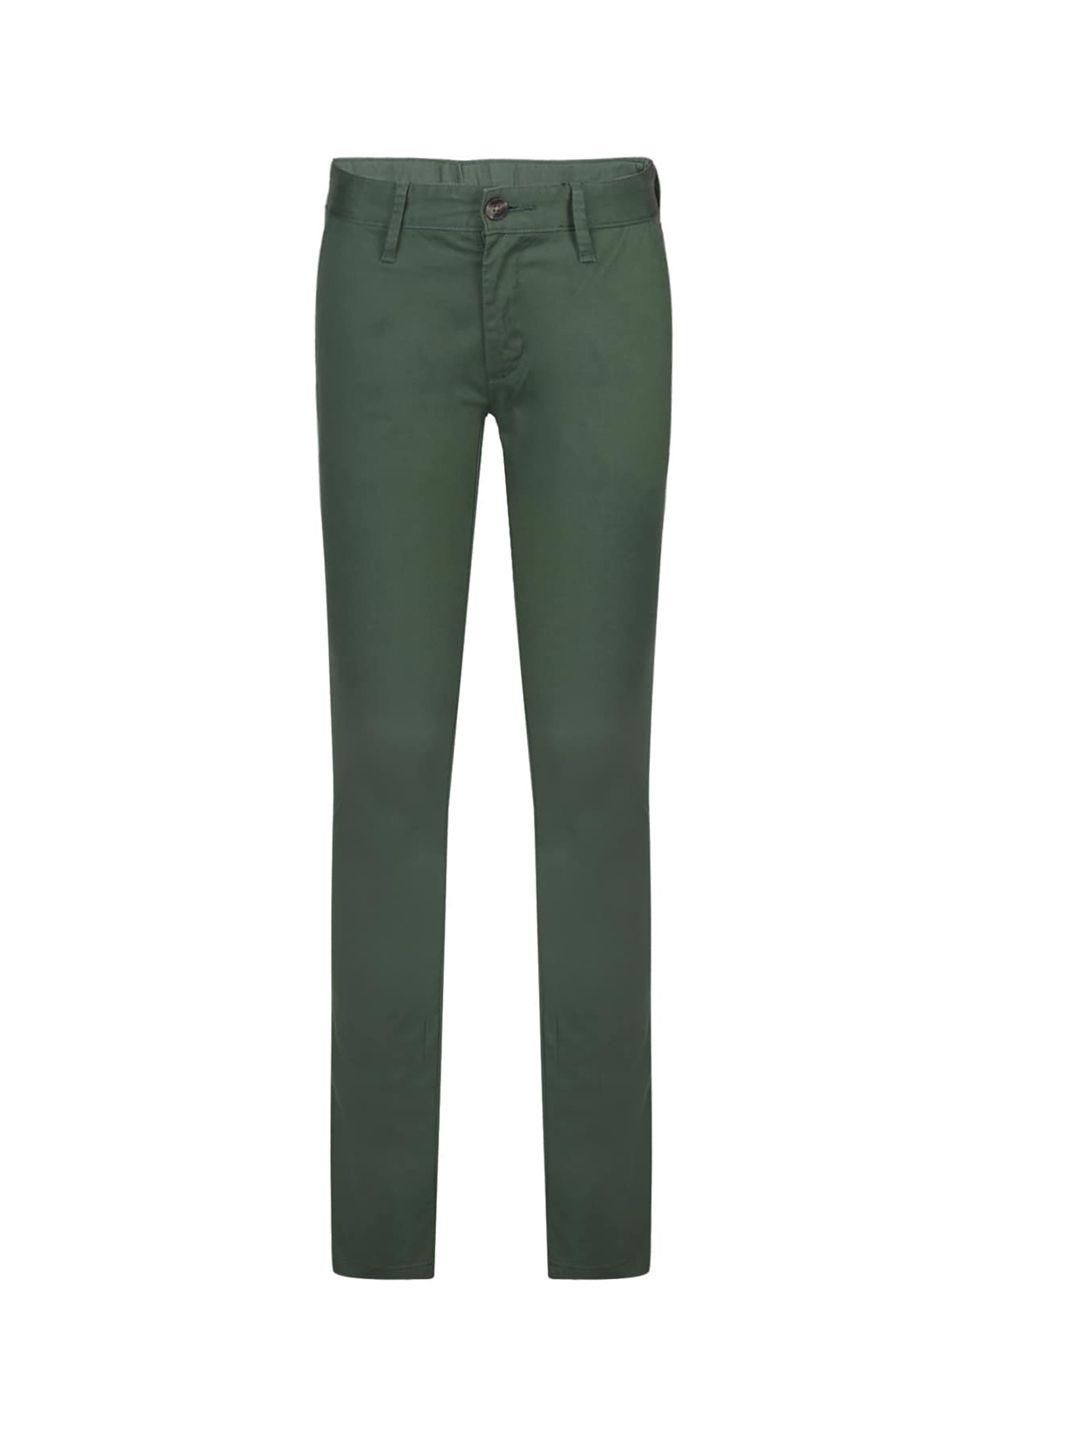 hackett london boys green solid chinos trousers